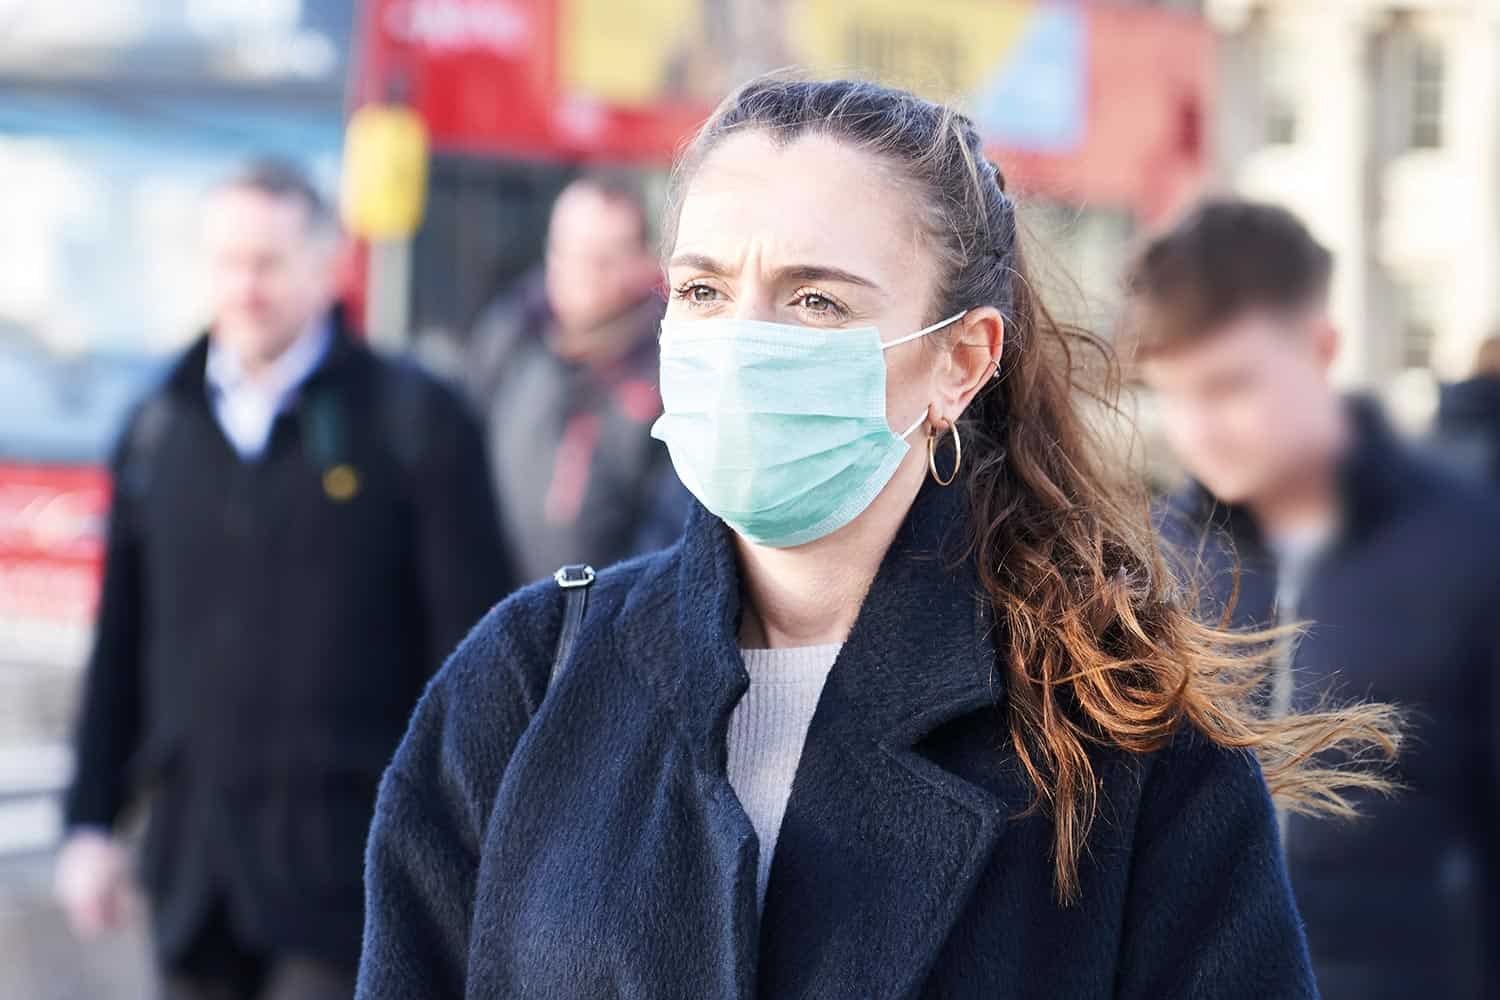 A woman wearing a coat and a mask on face.